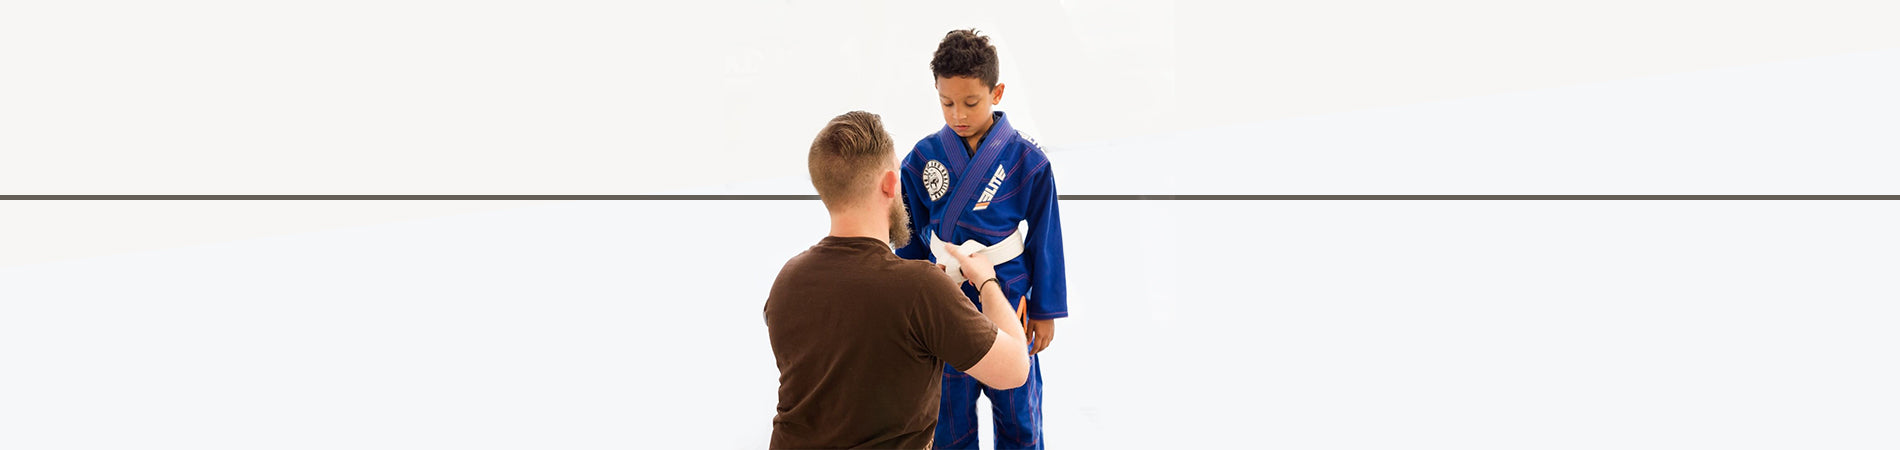 Tips for Parents to Start BJJ Training with Their Kids